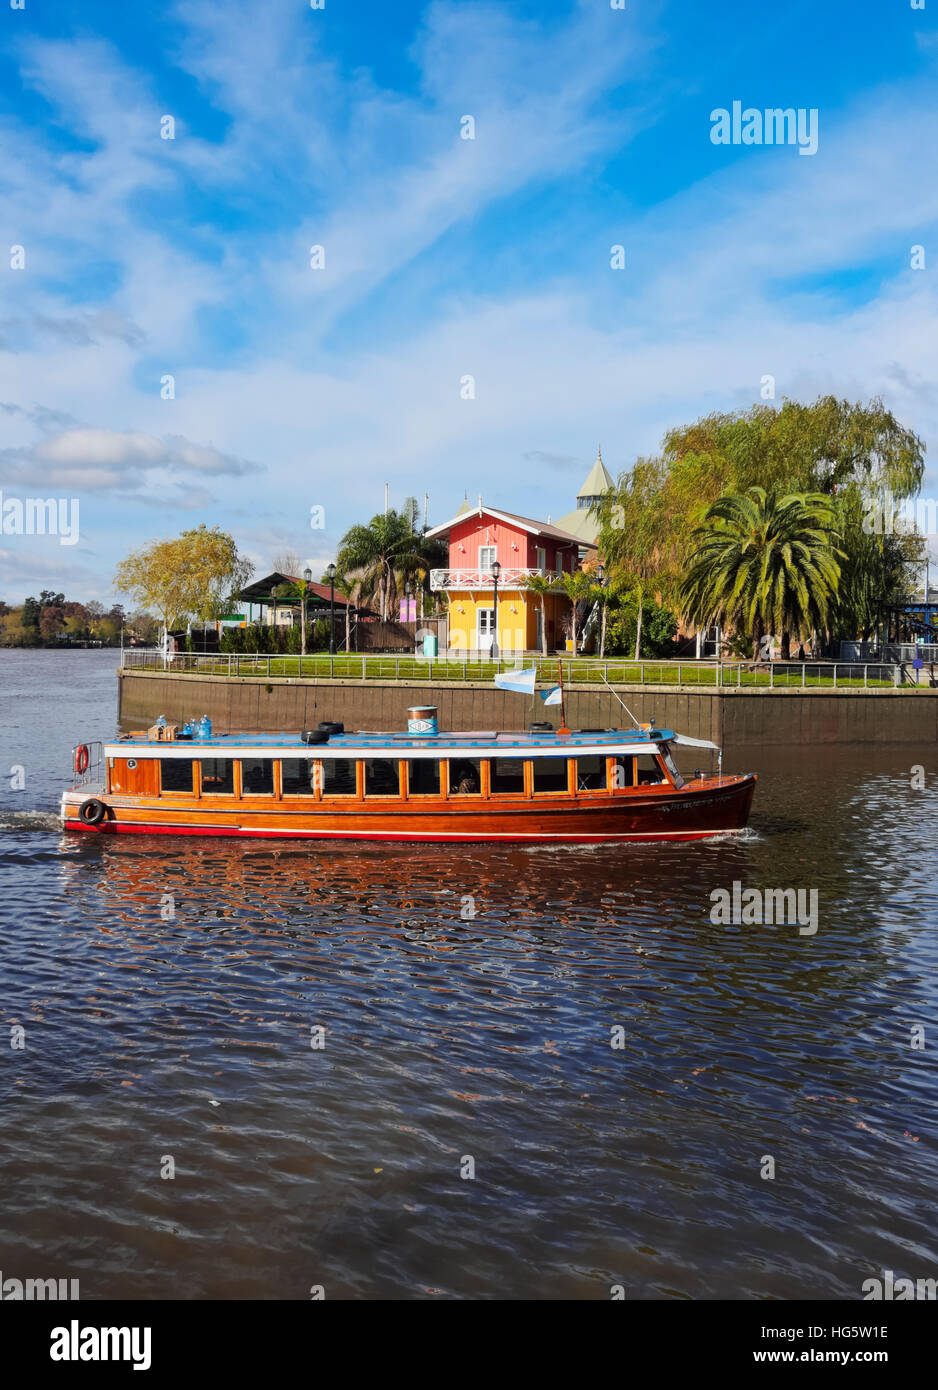 Argentina, Buenos Aires Province, Tigre, Vintage mahogany motorboat on the Tigre River Canal. Stock Photo